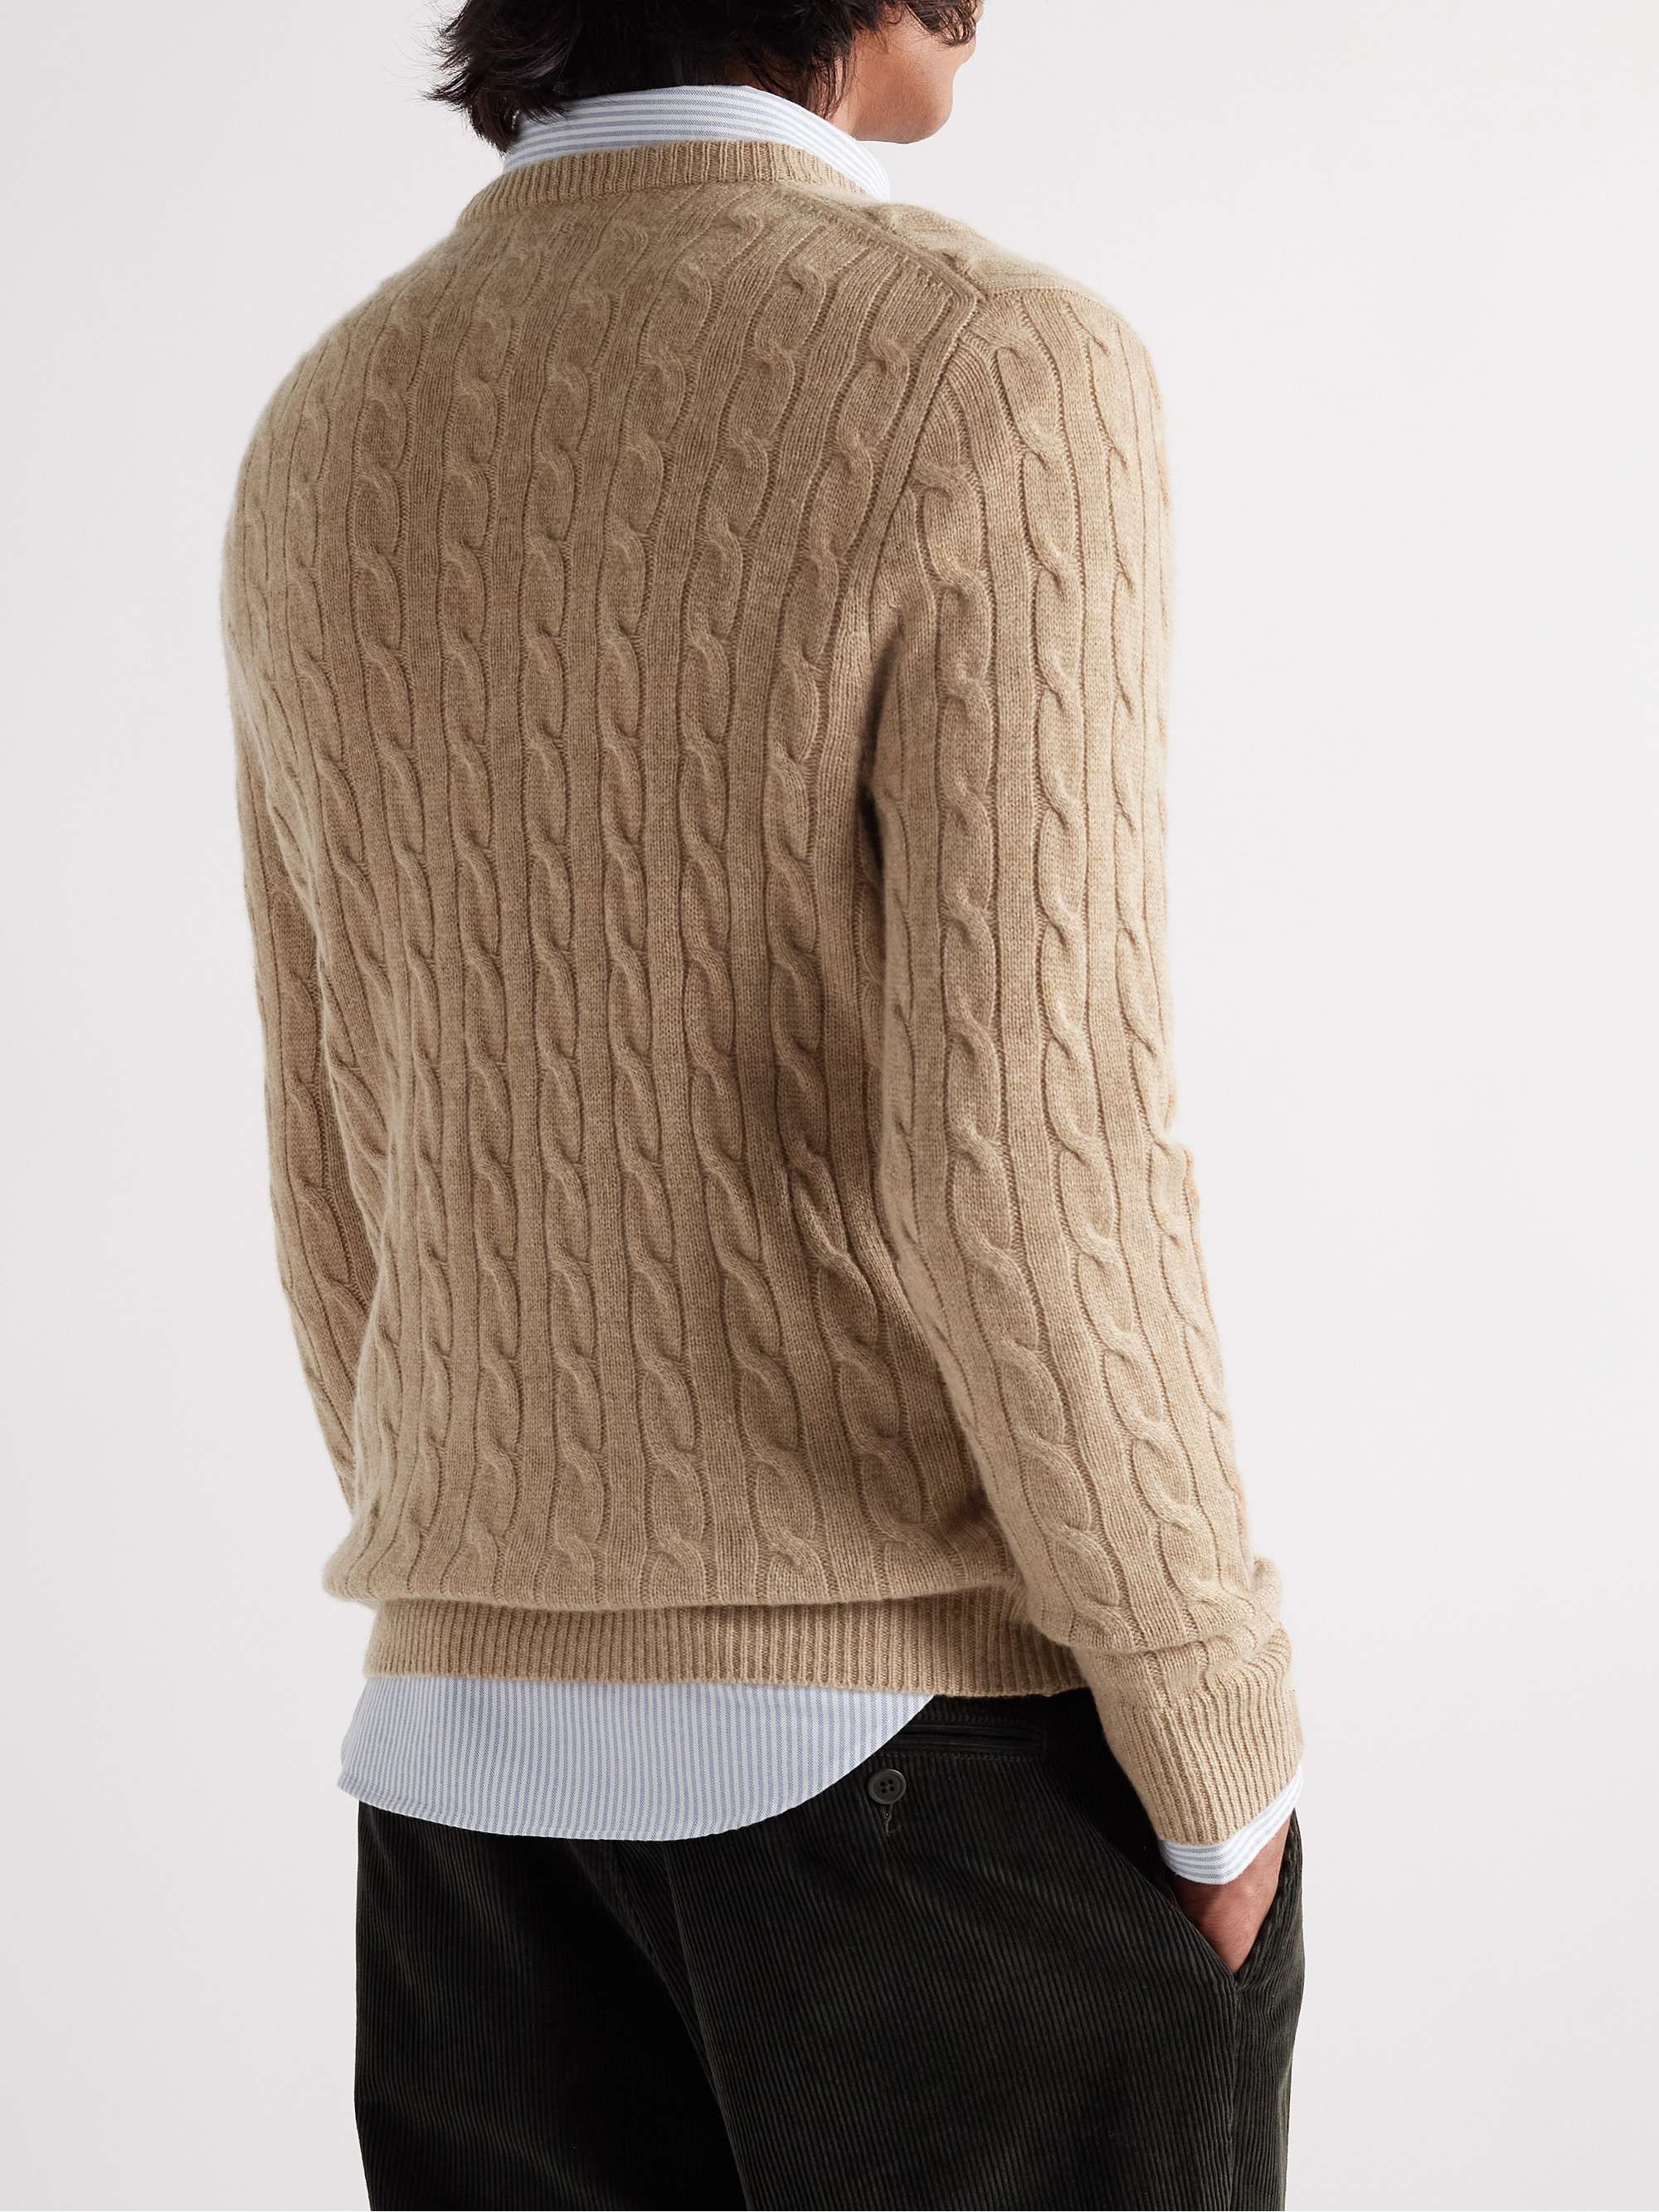 J.CREW Slim-Fit Cable-Knit Cashmere Sweater